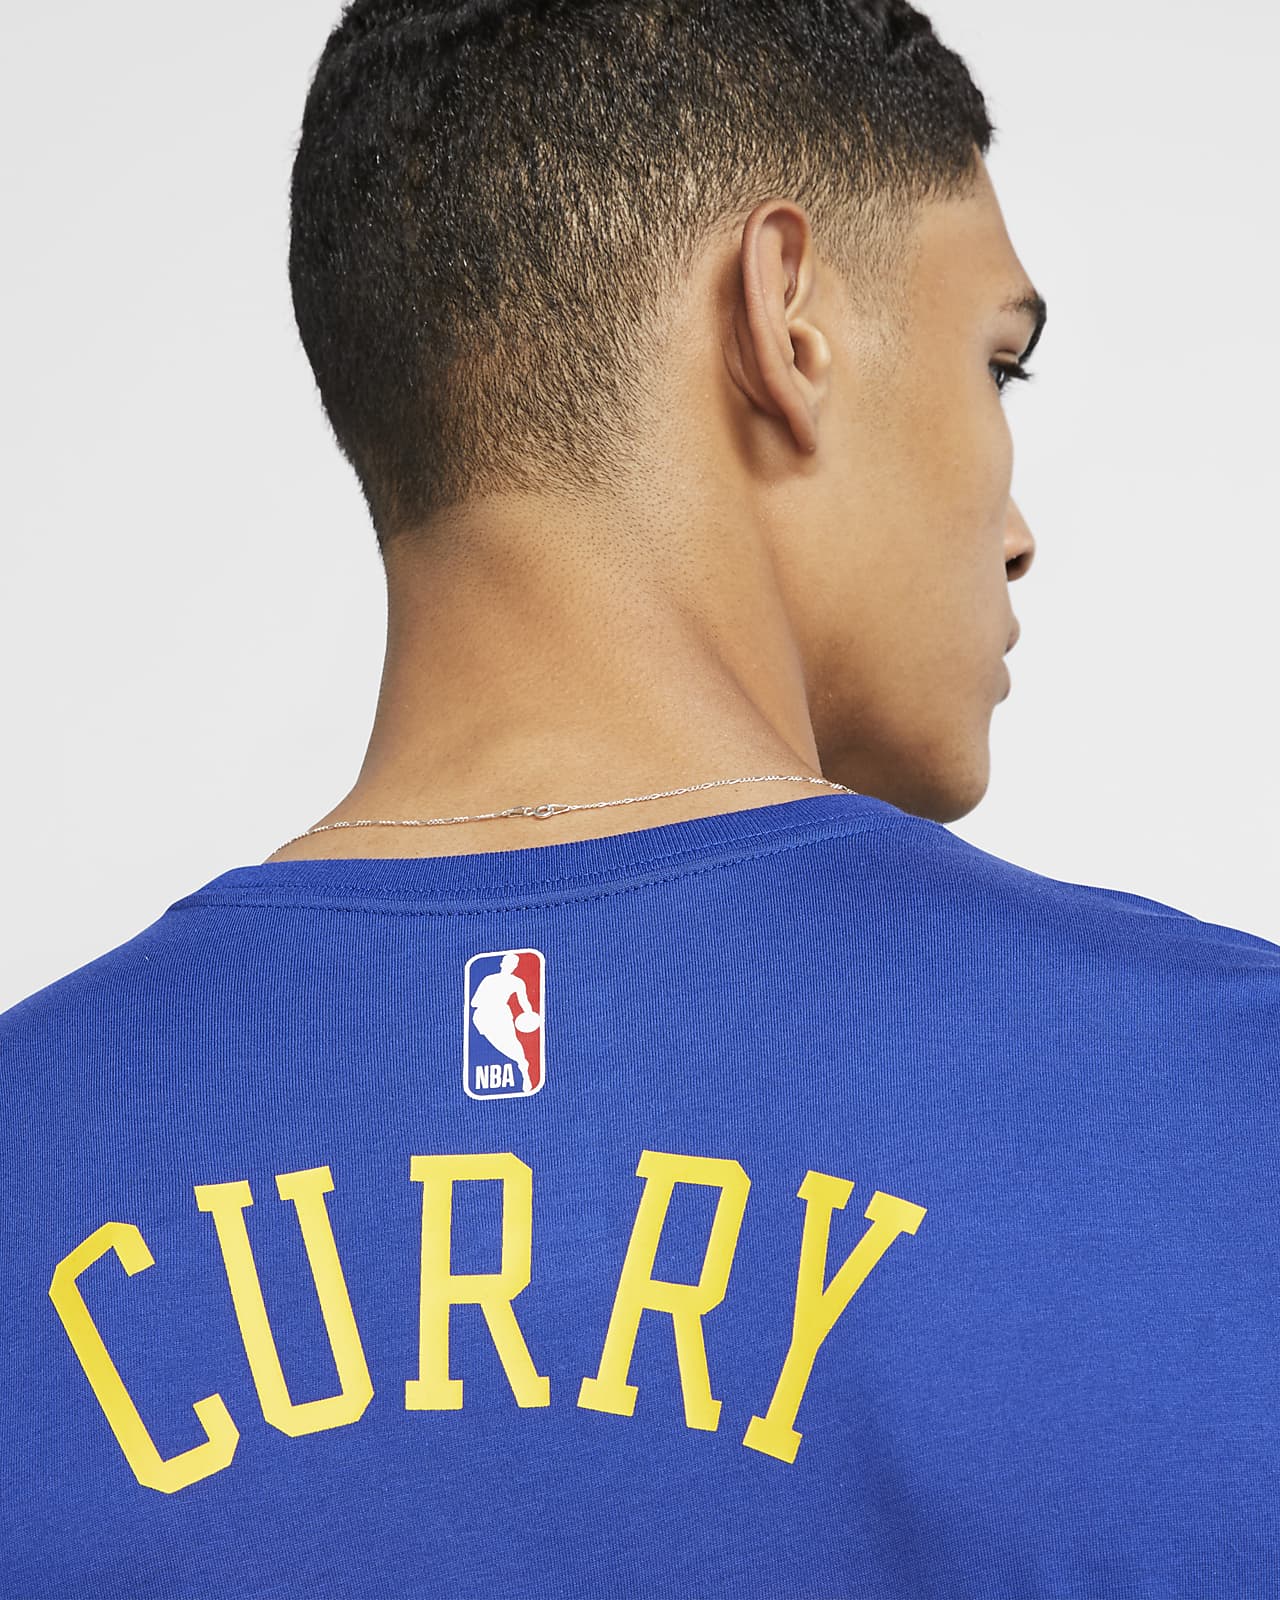 stephen curry fits